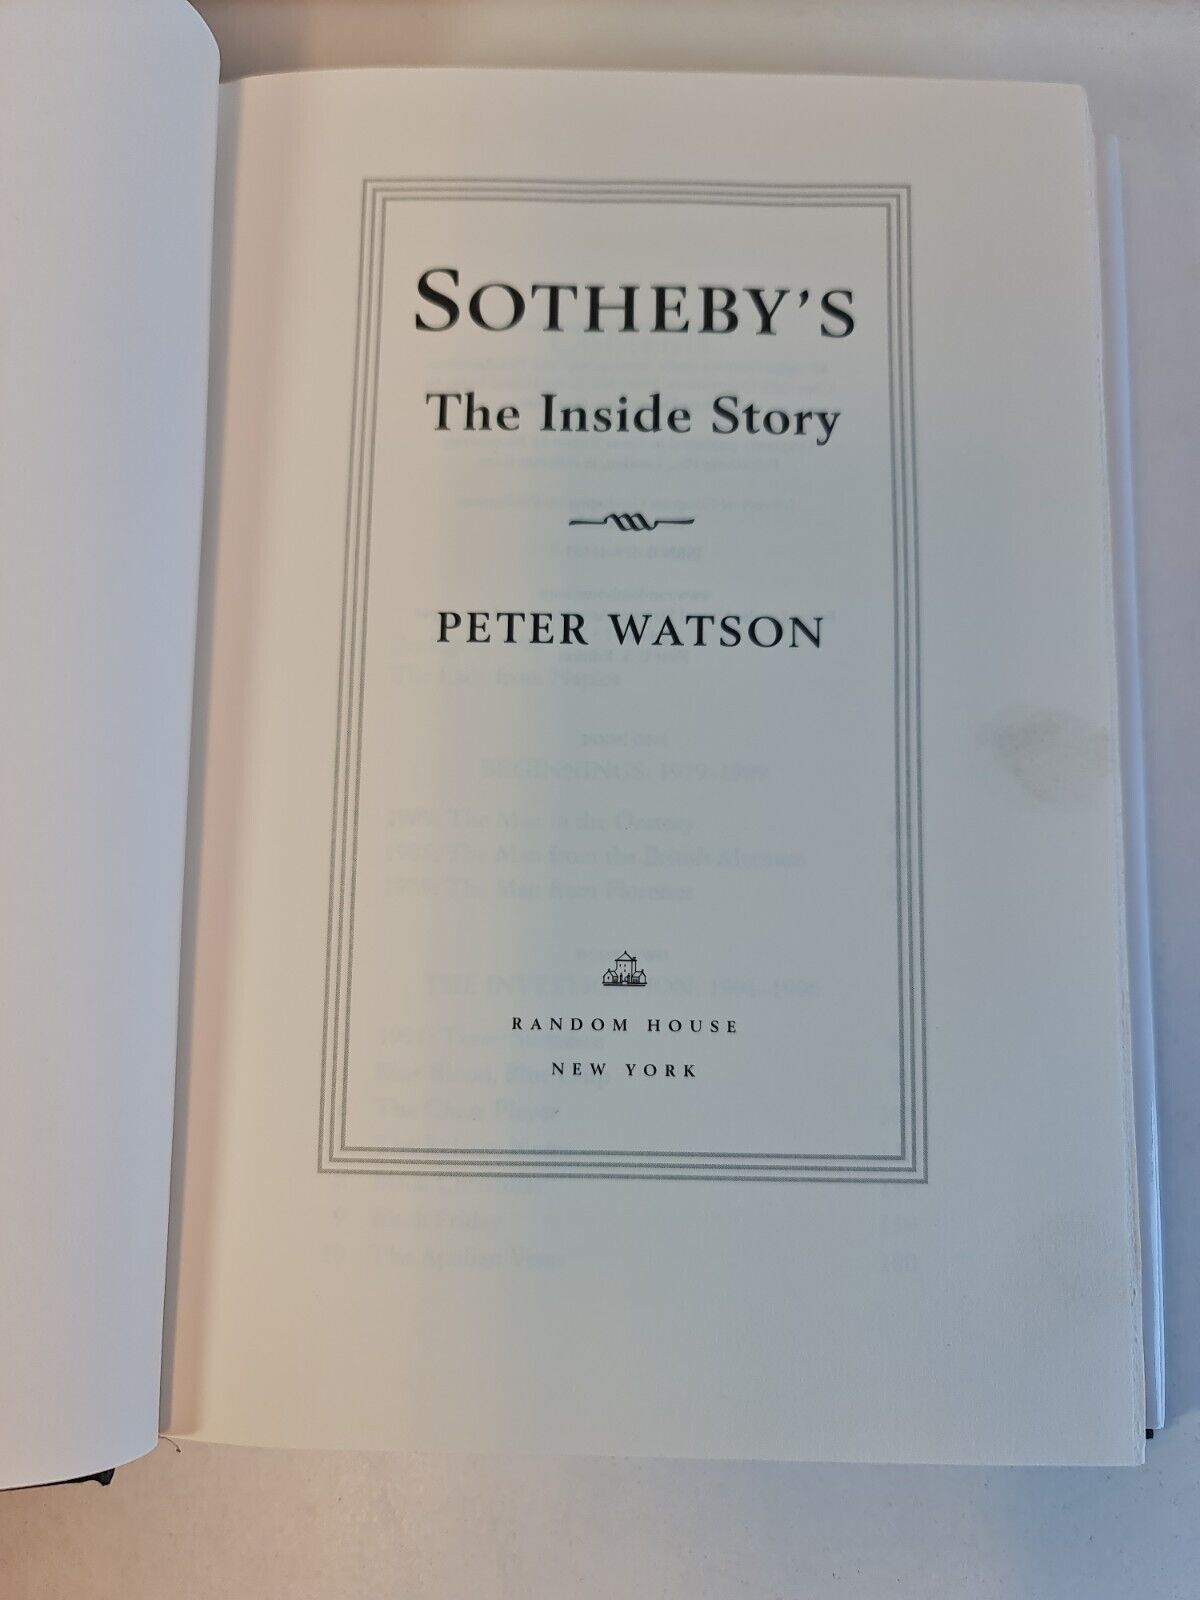 Sotheby's: The Inside Story by Peter Watson (1998)